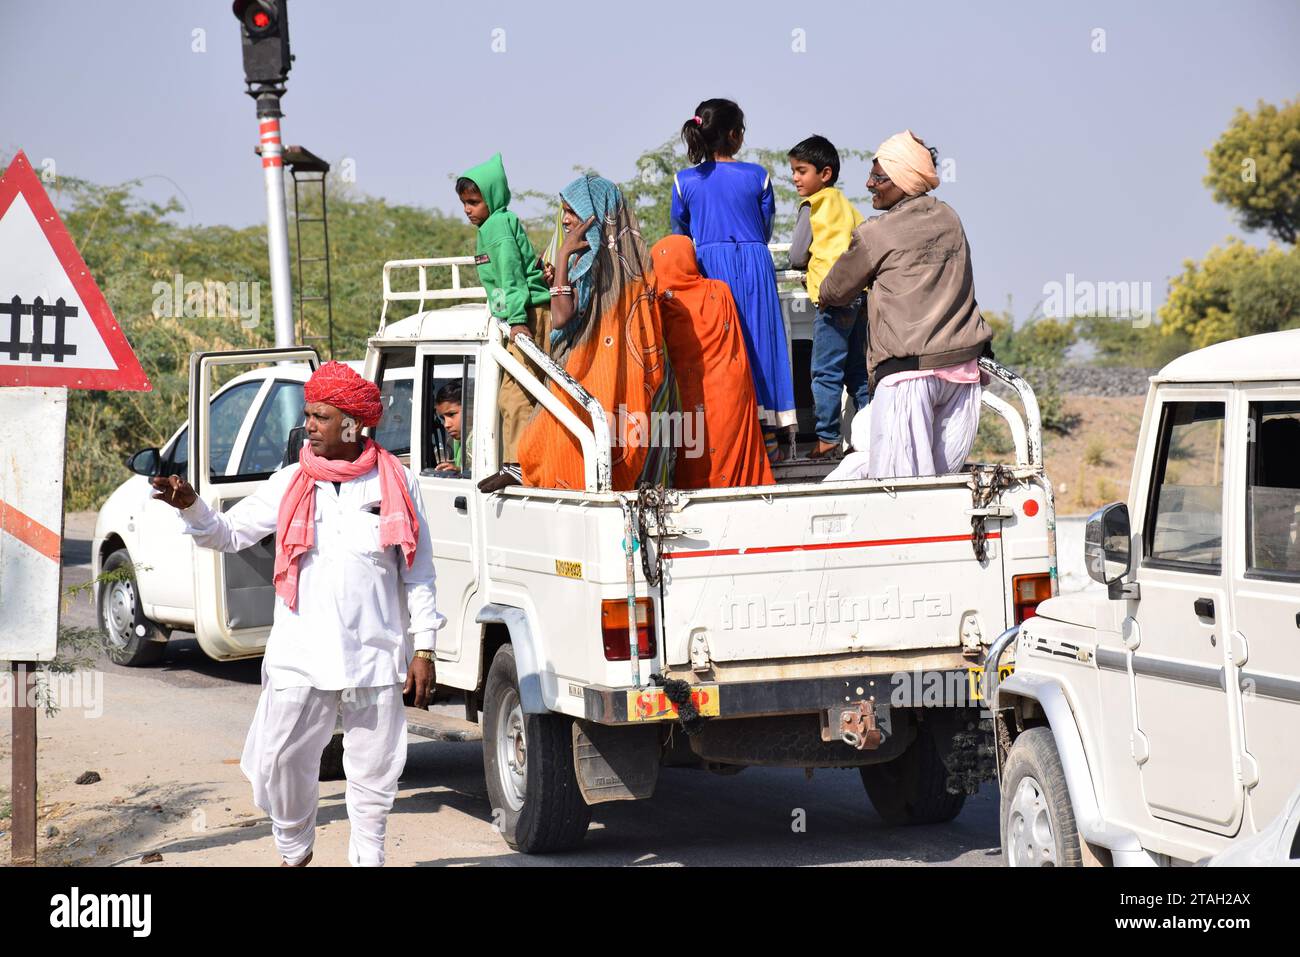 Indian people waiting on a truck for the rail crossing on the road to Jodhpur, Rajasthan - India Stock Photo